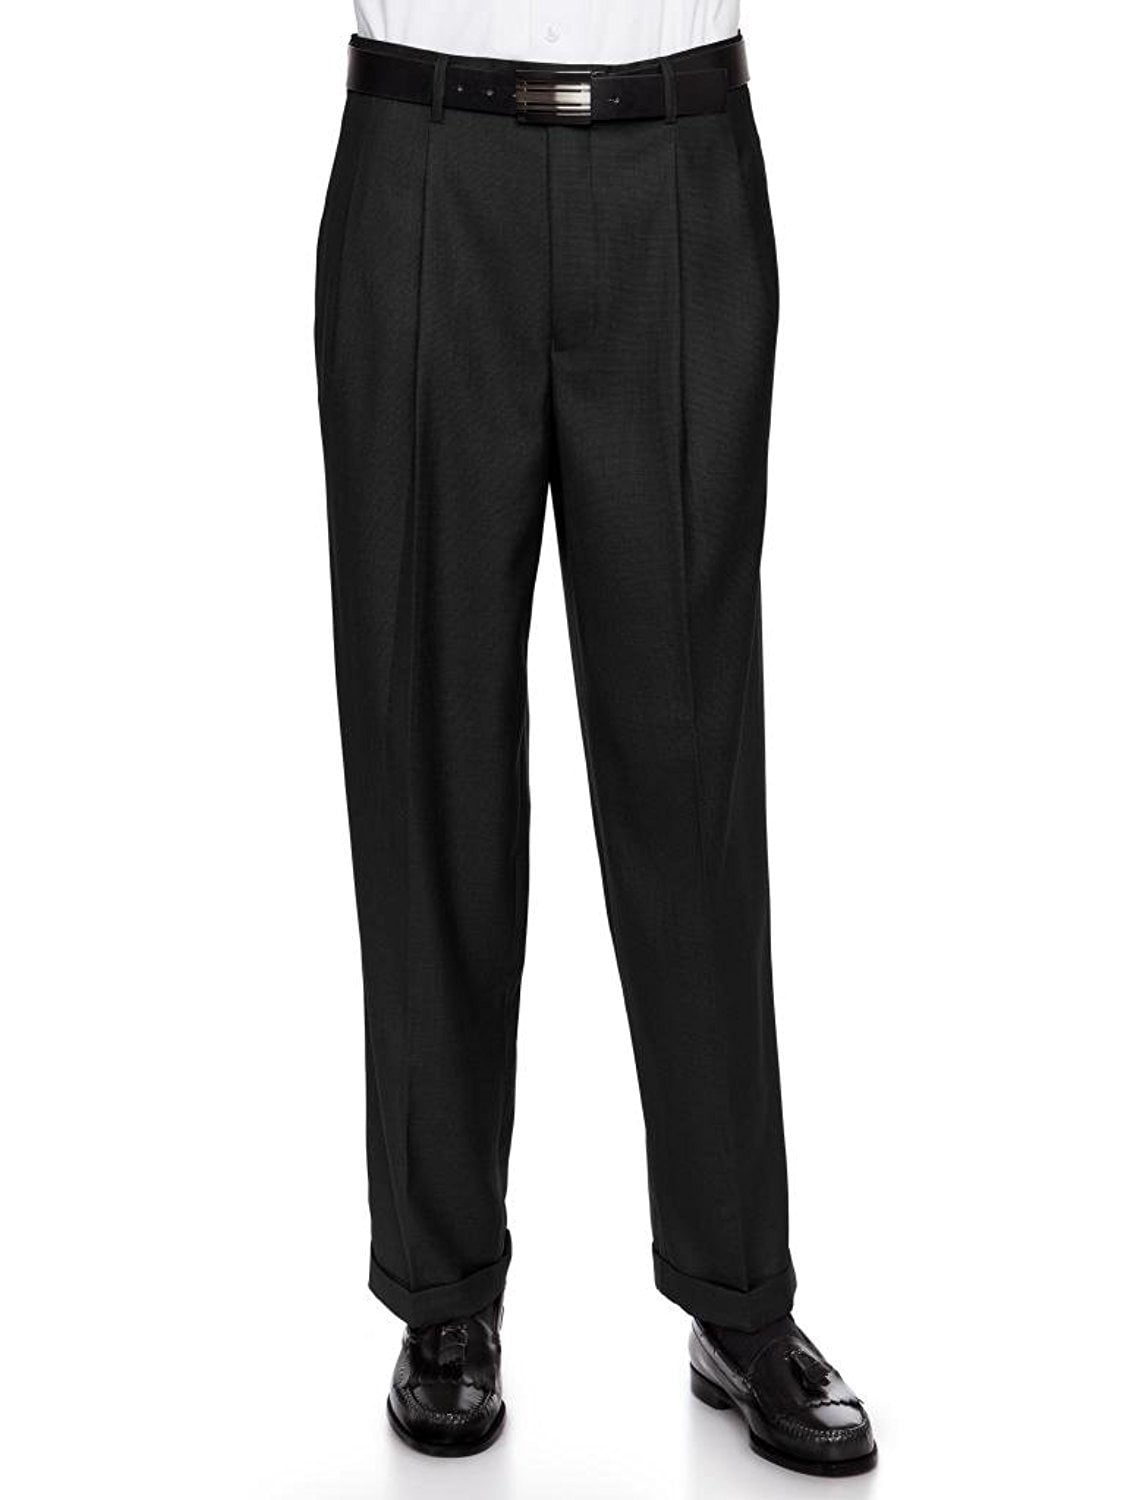 Giovanni Uomo Mens Pleate Front Traditional Fit Dress Pant Black 30 ...